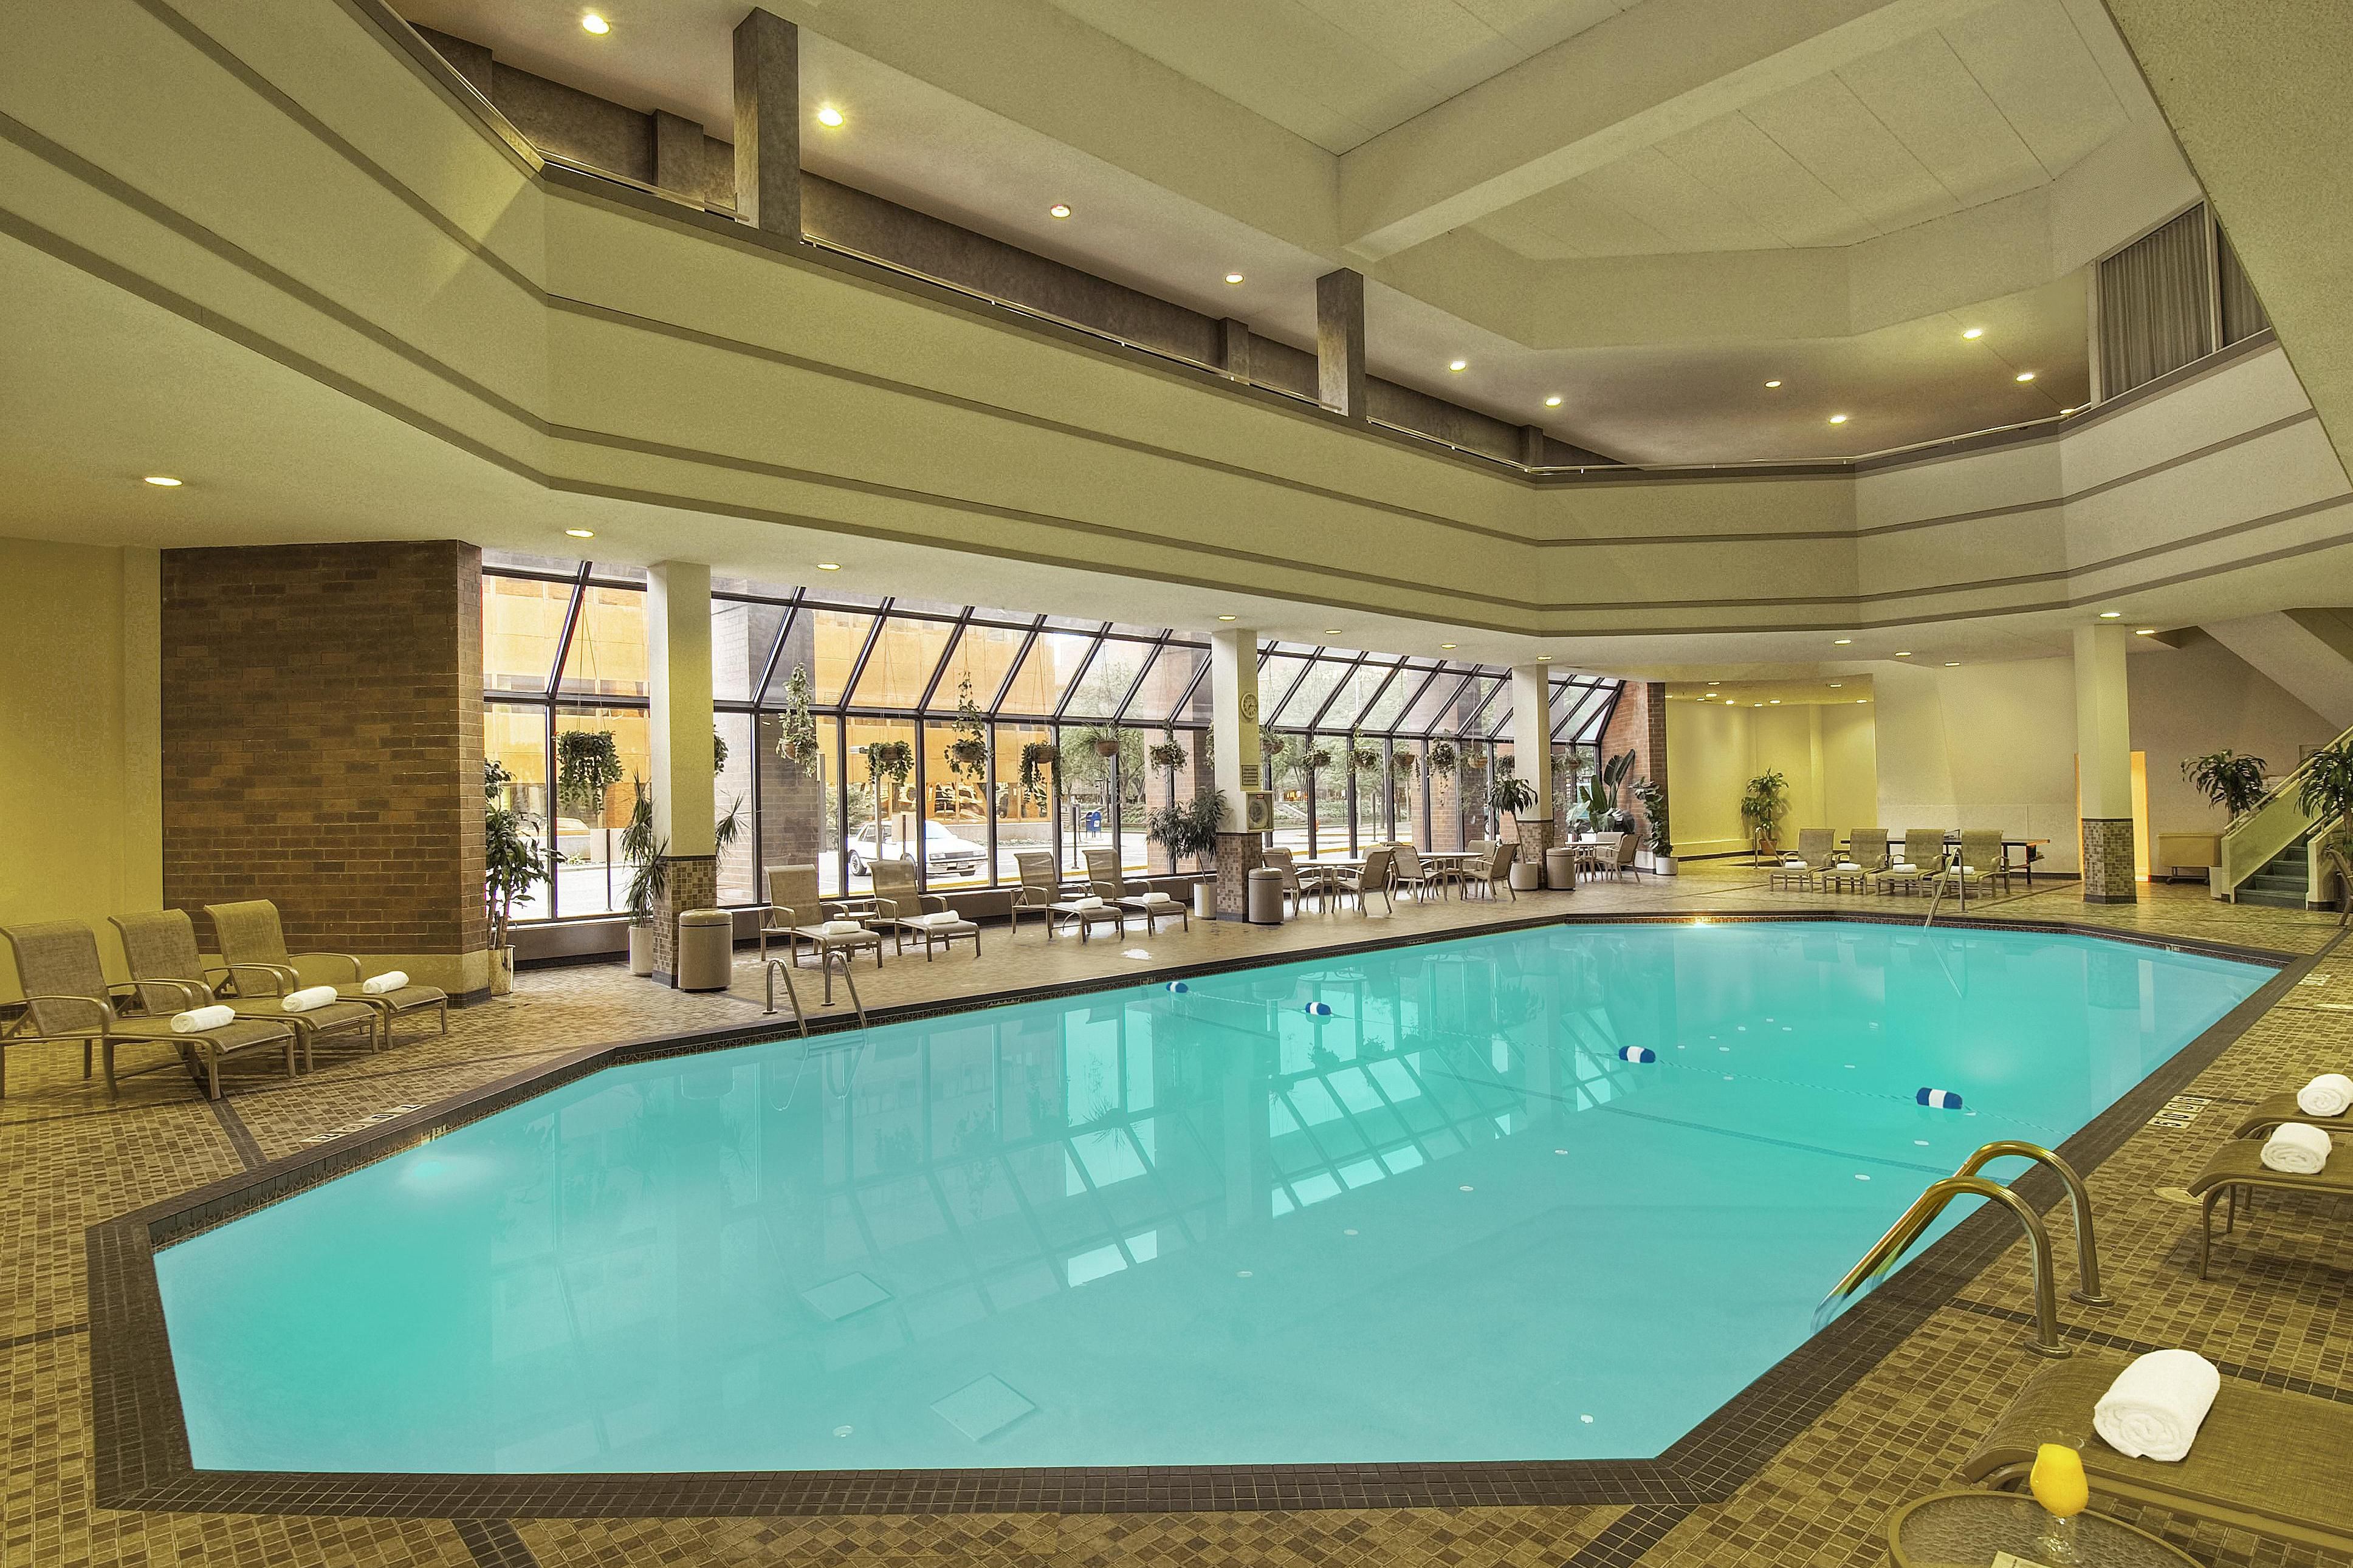 Swimming Pool at the Crowne Plaza Suites MSP Airport 